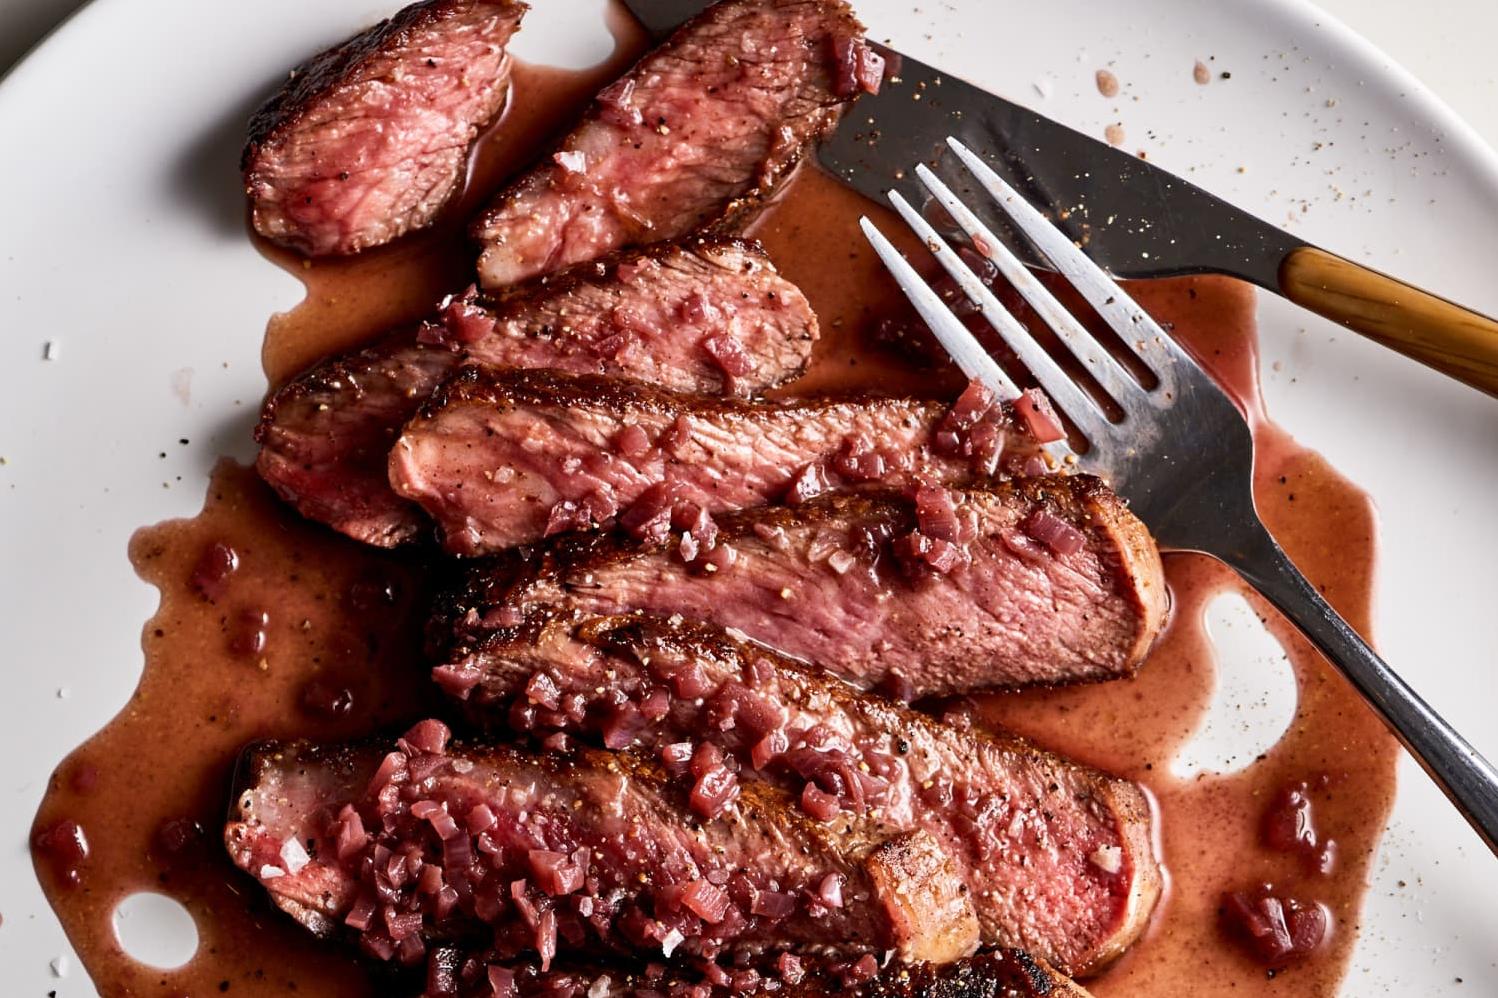  The rich and velvety Cabernet sauce takes this dish to another level.